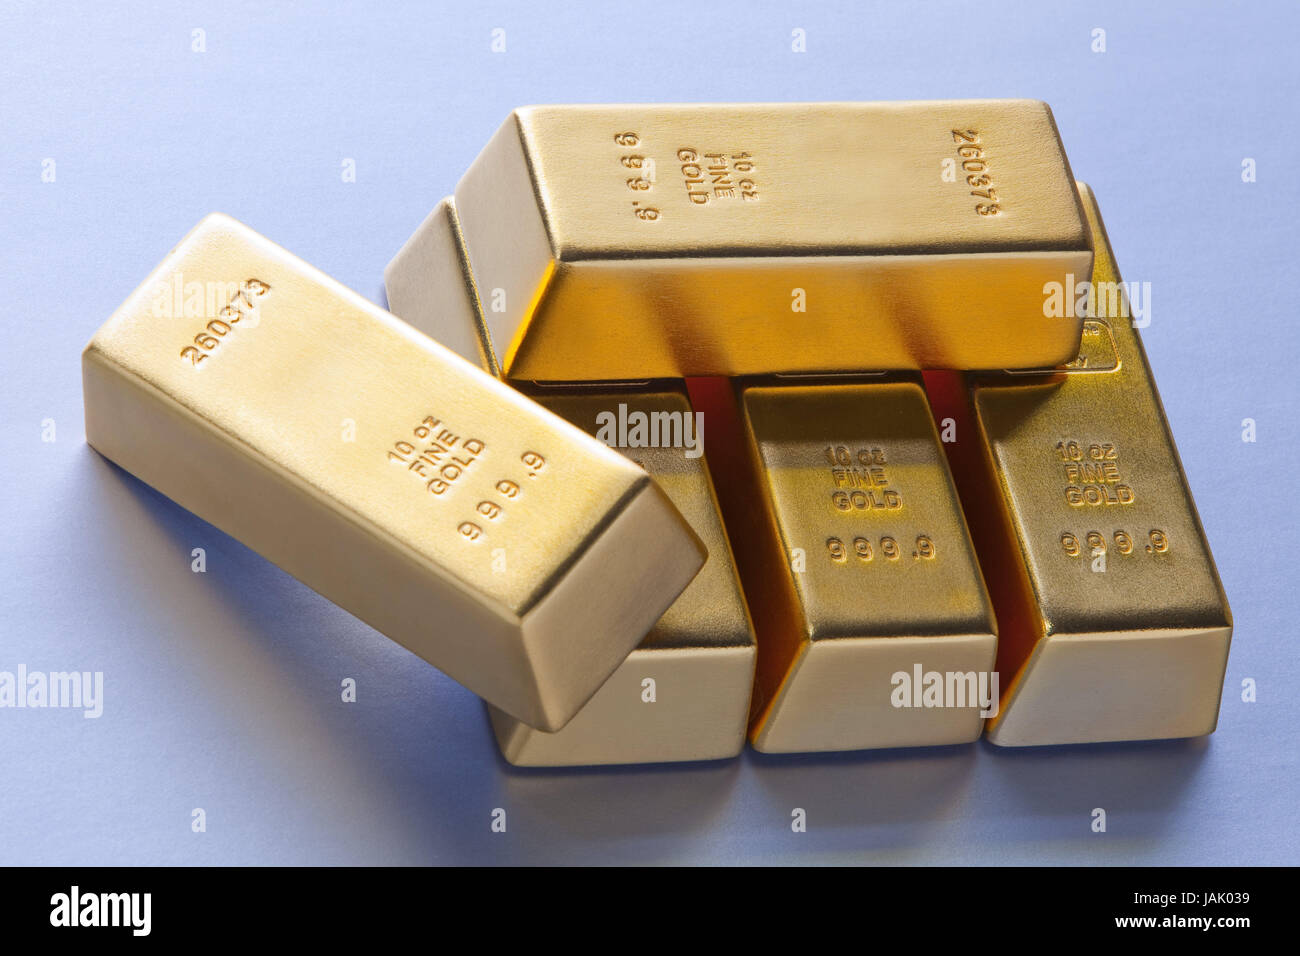 five gold bars,stacked,value,worth-stably,depreciation,fixed assets,security risk,brilliantly,gold,gold bar,fine gold,legal estate,wealthy,insurance,stamp,stamped,purely,purely,profit,loss,attachment,investment,value attachment,wealth,luxury, Stock Photo